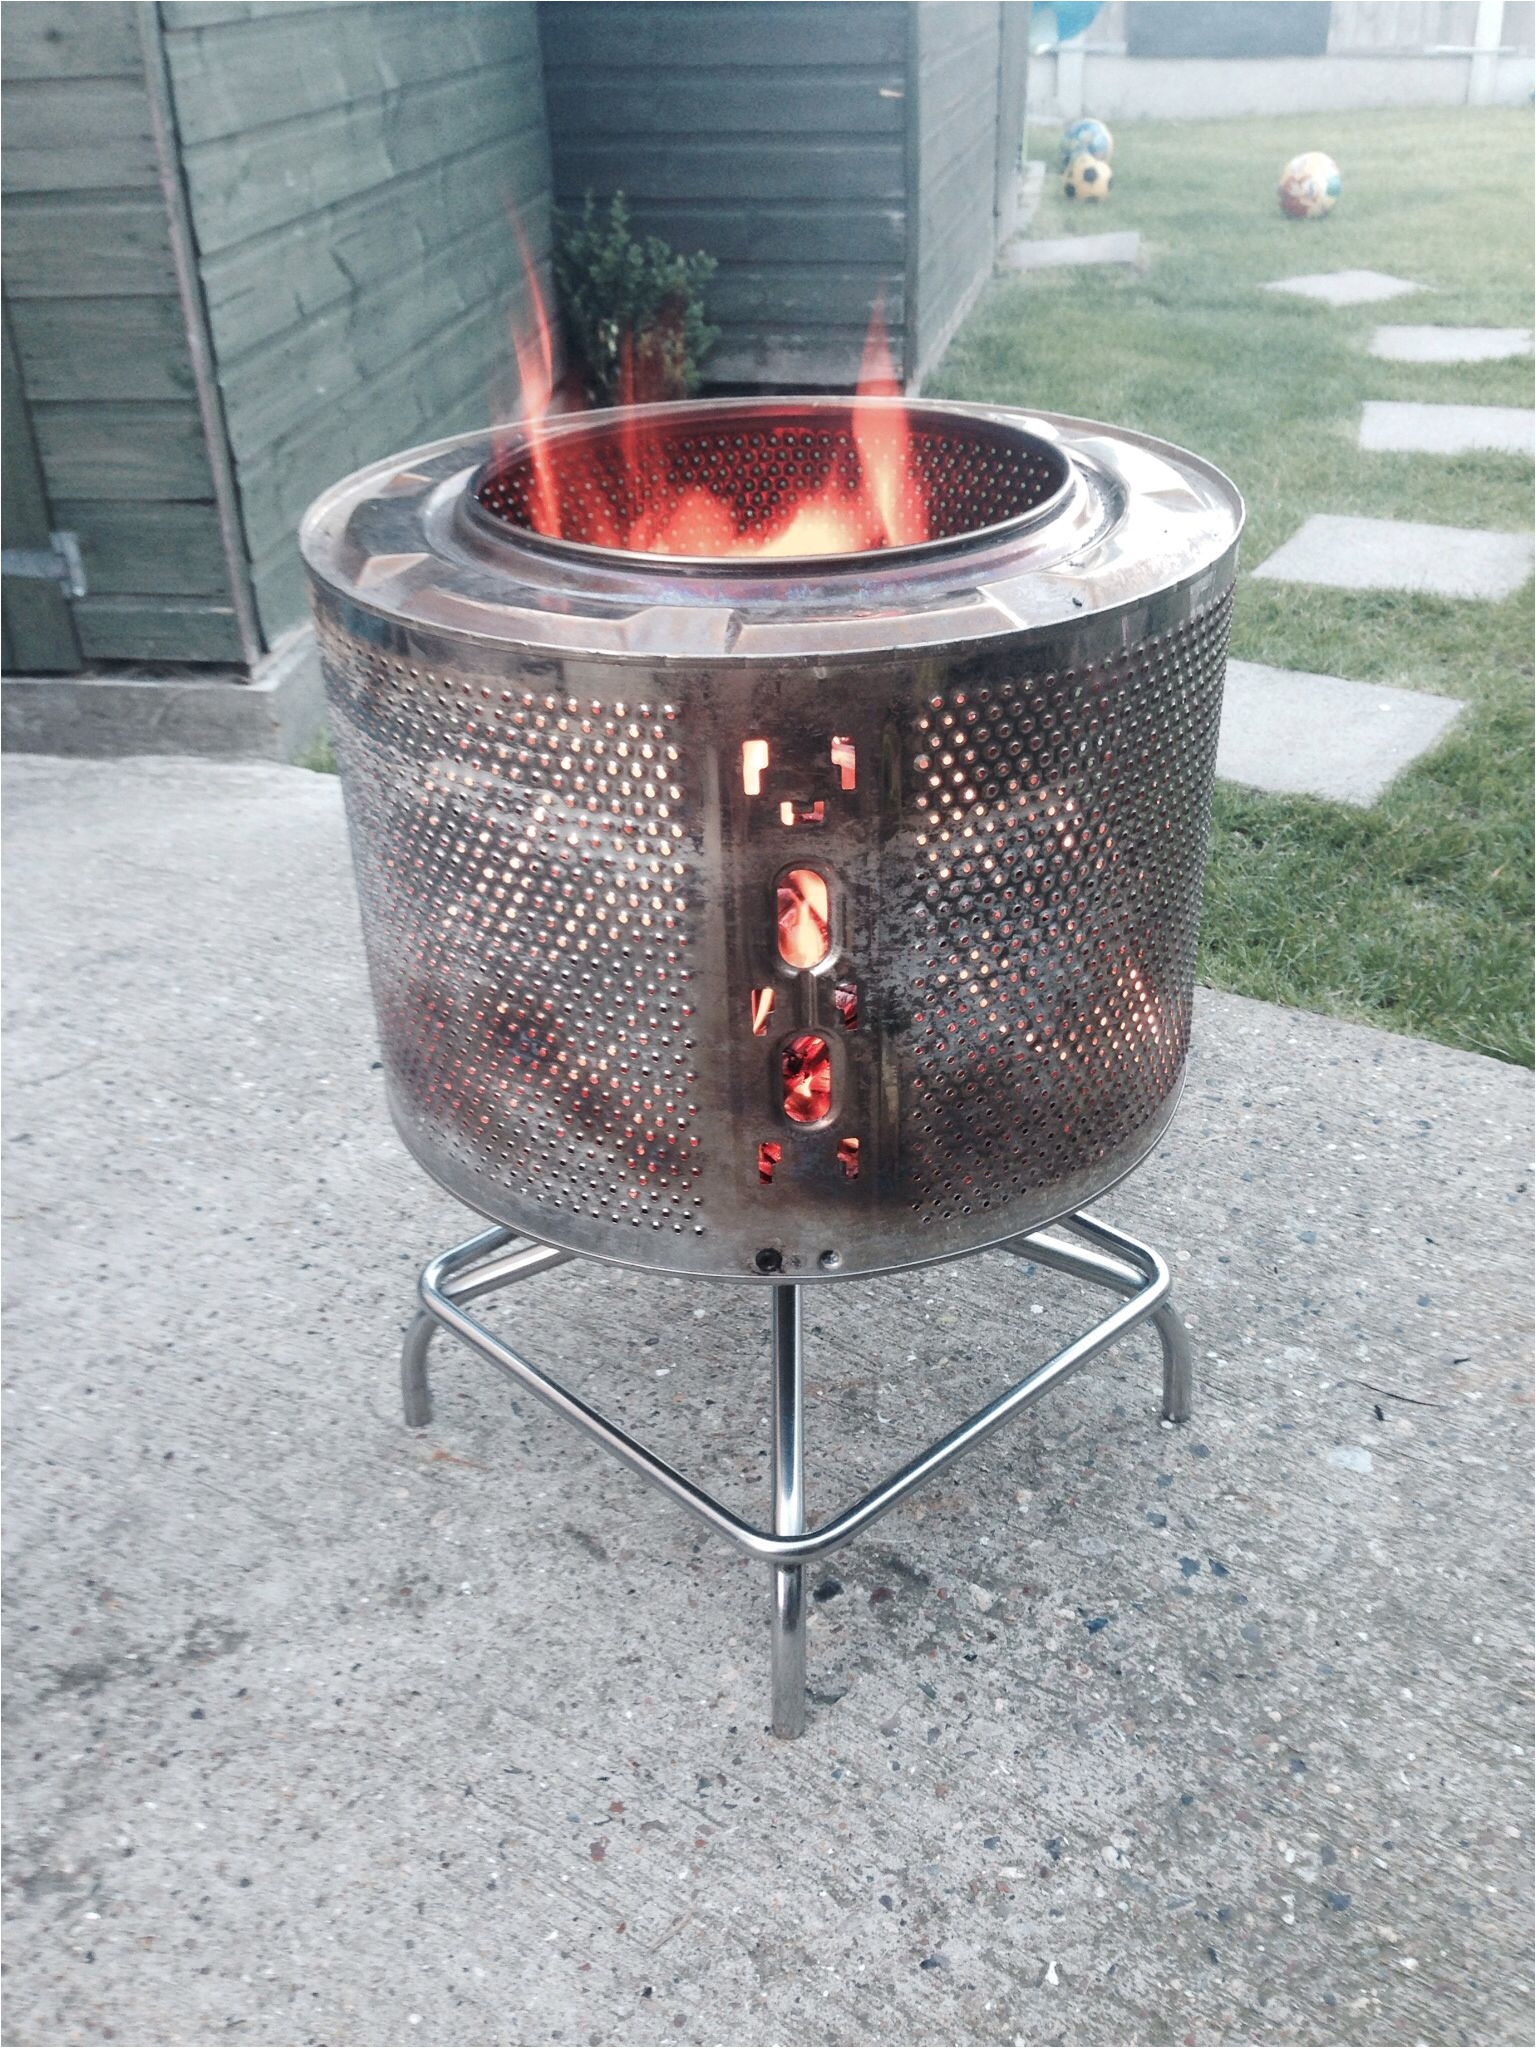 55 gallon steel drum fire pit unique new fire pit washing machine drum and stainless steel